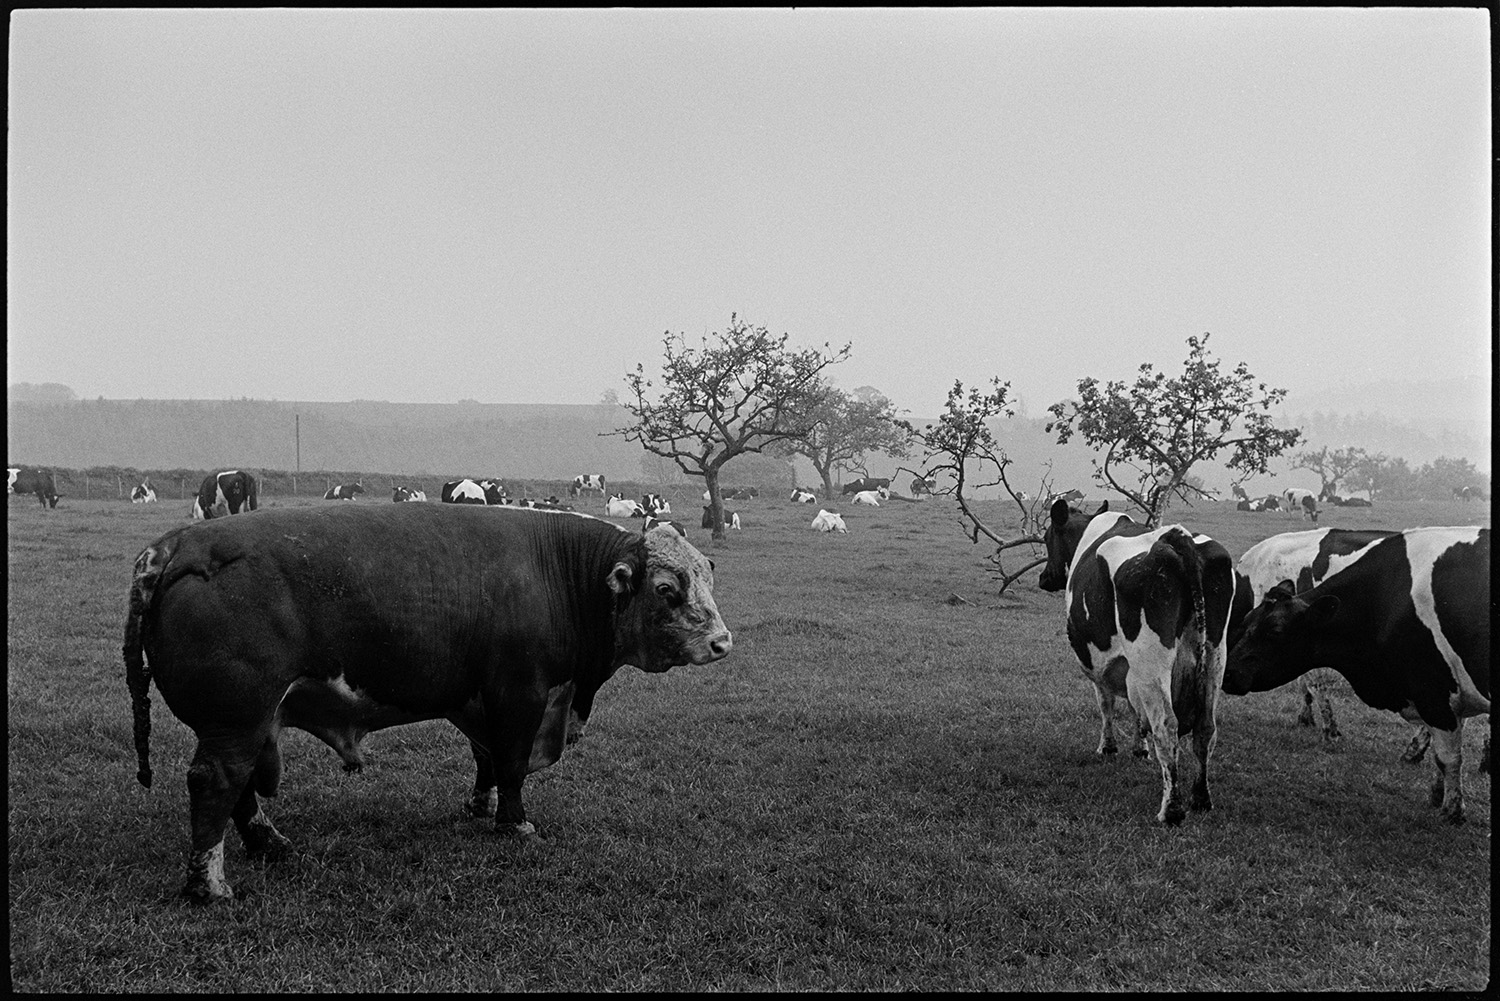 Orchards, bull and cows in former orchard.
[A bull standing with a herd of cows in a former orchard near Eggesford. A misty landscape is in the background.]